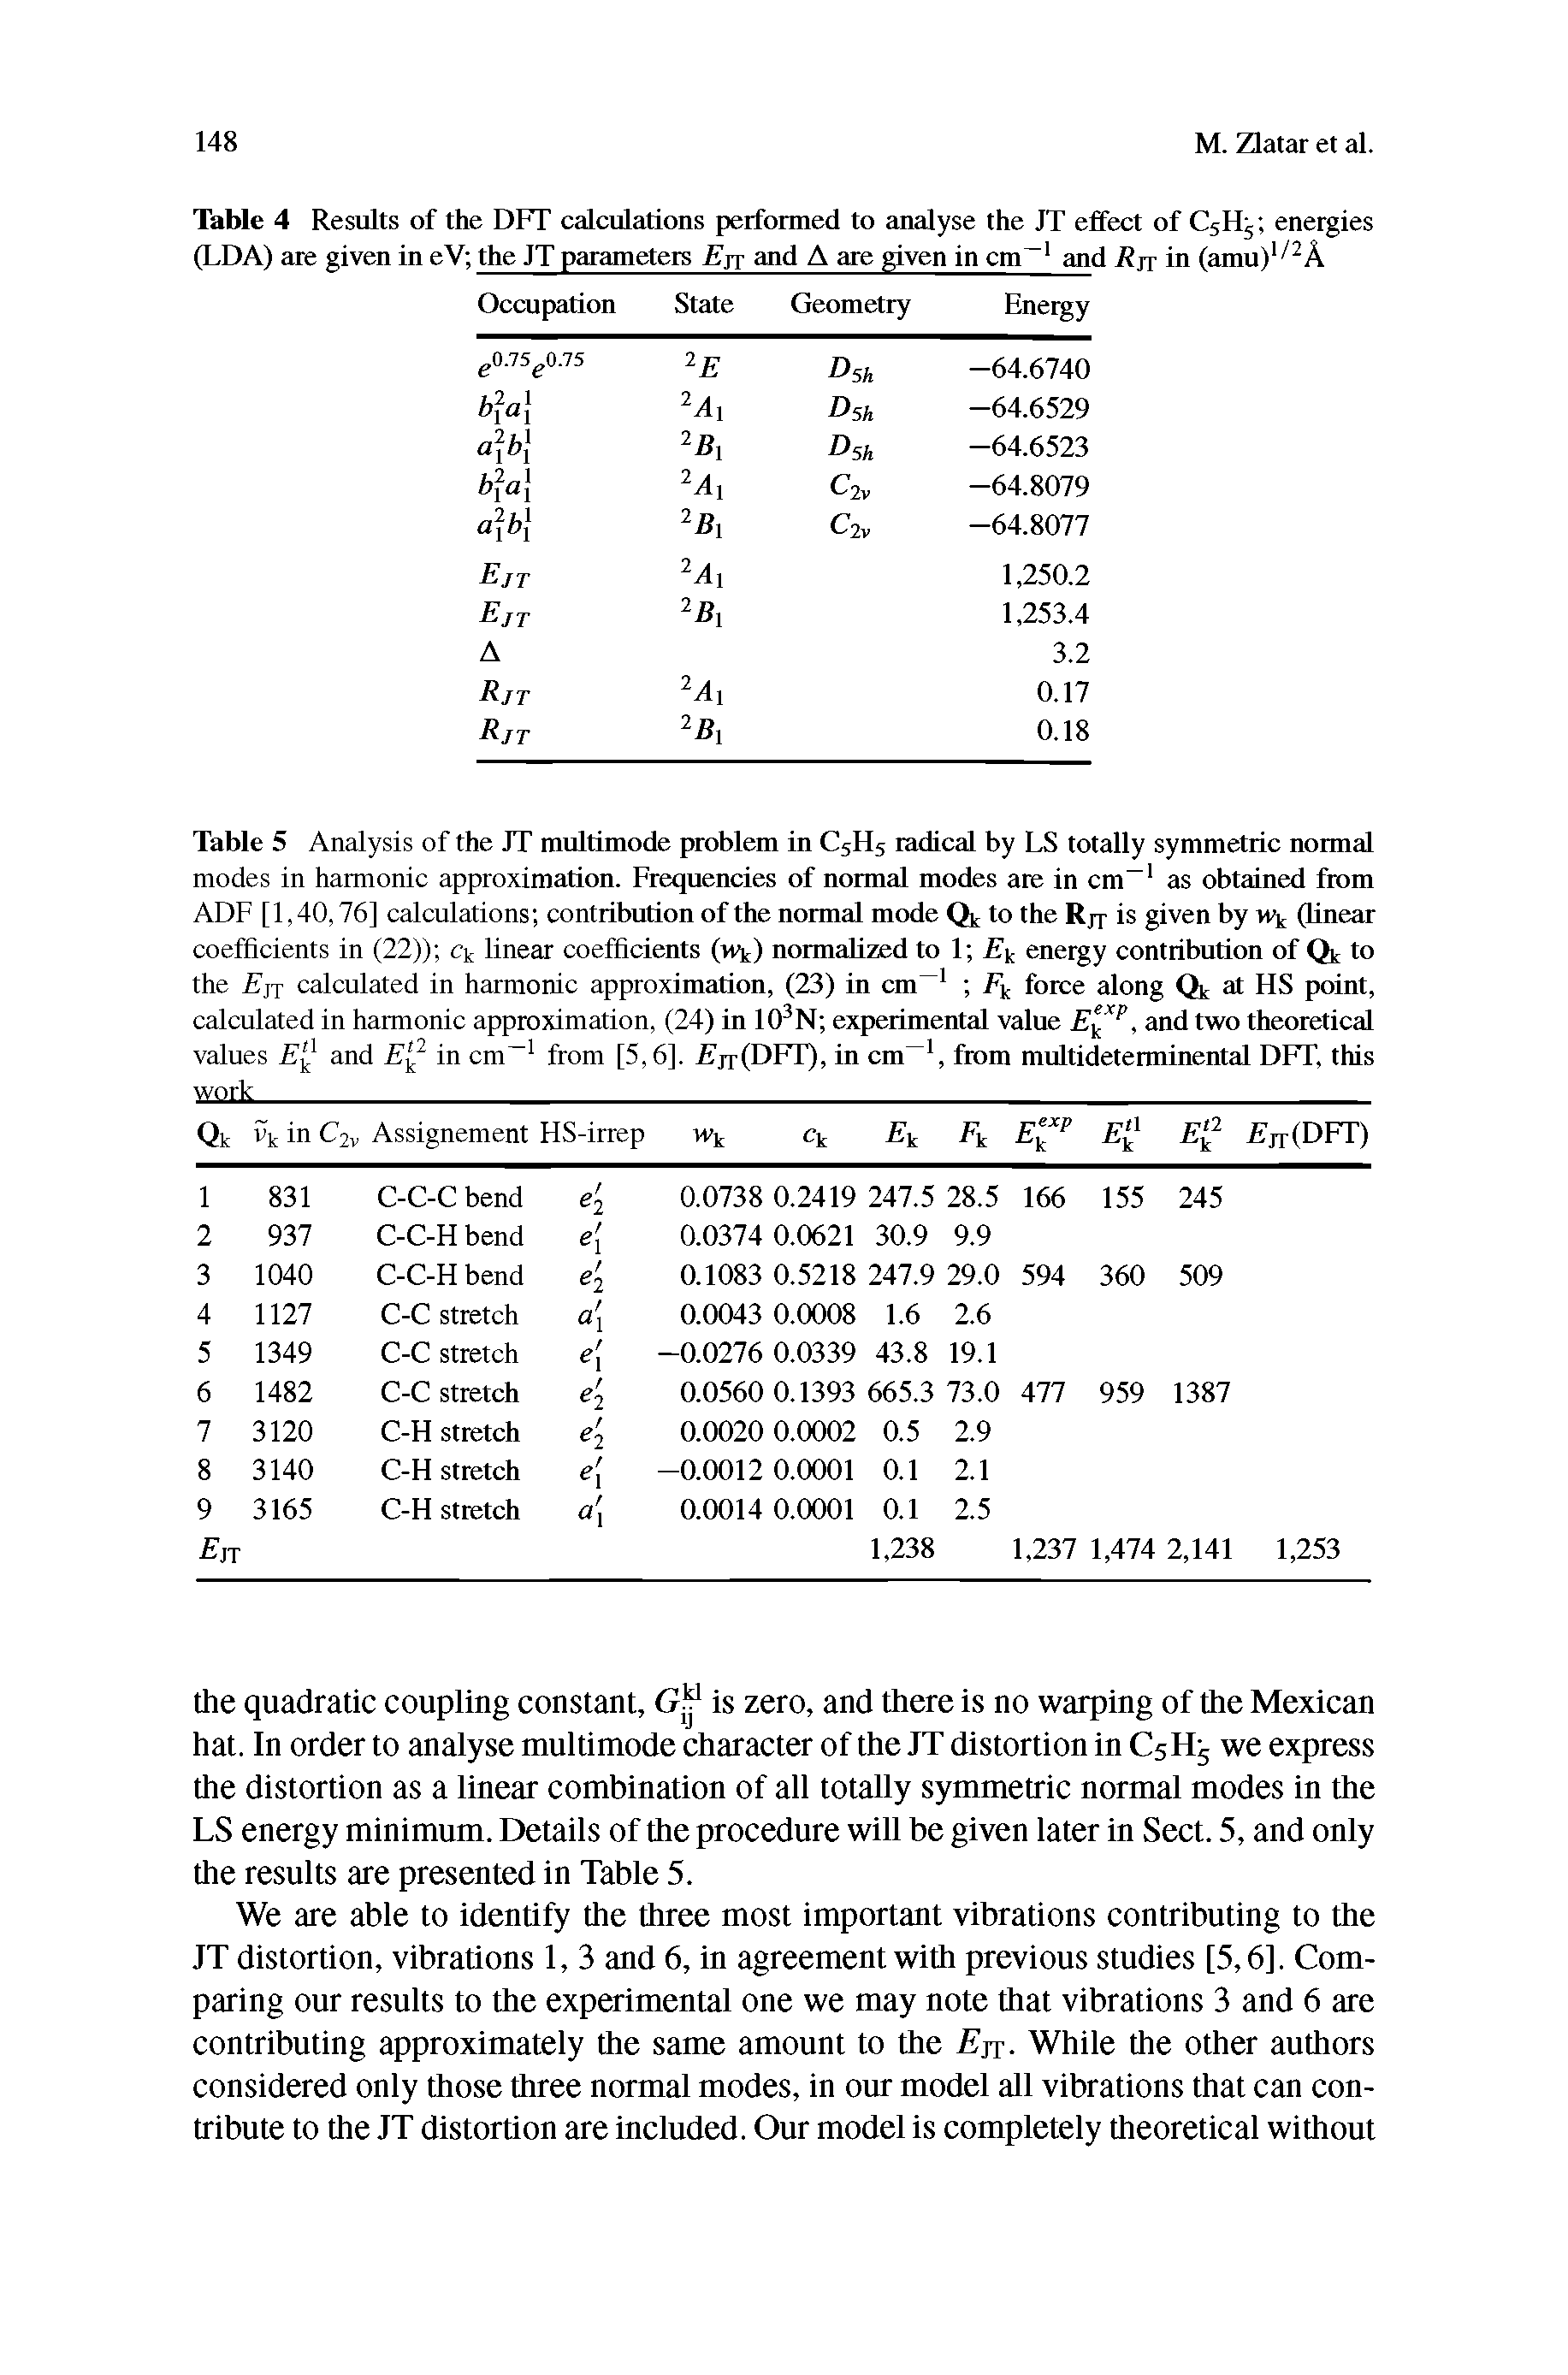 Table 5 Analysis of the JT multimode problem in C5H5 radical by LS totally symmetric normal modes in harmonic approximation. Frequencies of normal modes are in cm as obtained from ADF [1,40,76] calculations contribution of the normal mode to the Rjj is given by (linear coefficients in (22)) linear coefficients (w ) normabzed to 1 itk energy contribution of to the Ejj calculated in harmonic approximation, (23) in cm force along at HS point, calculated in harmonic approximation, (24) in lO N experimental value, and two theoretical values and E in cm from [5,6]. Fjr(DFT), in cm, from multideterminental DPT, this...